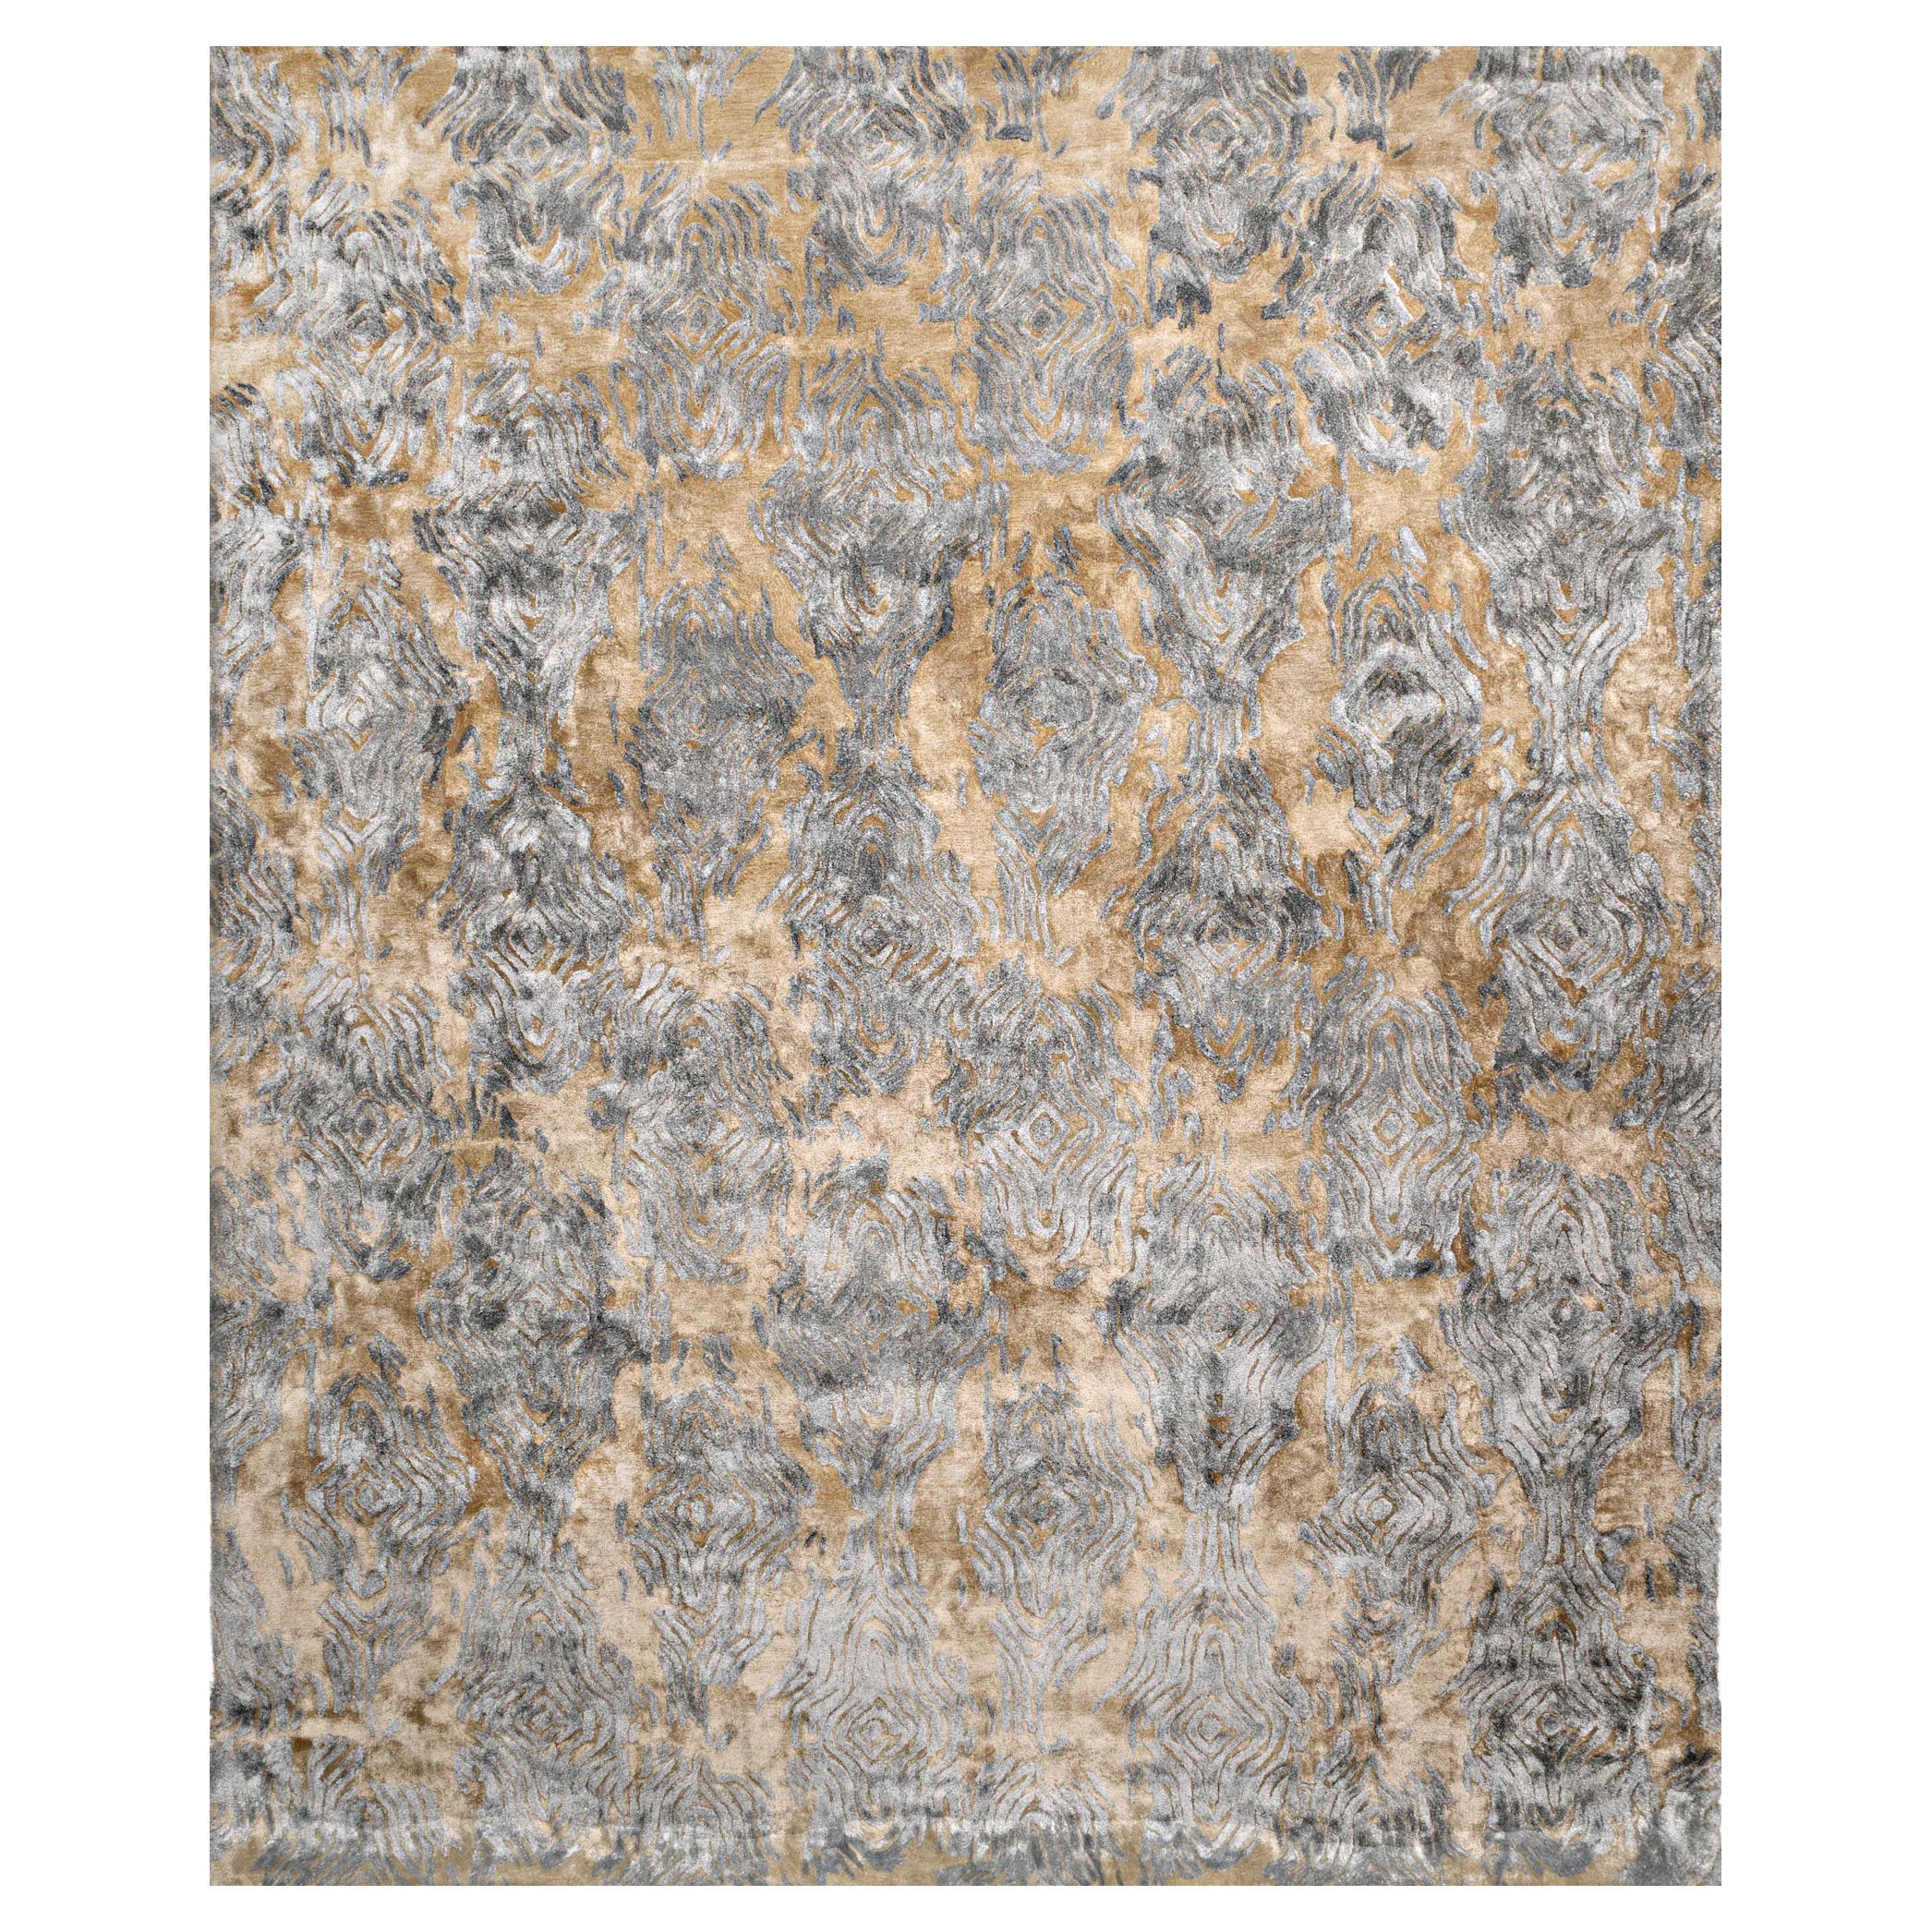 MASSIF Hand Tufted Contemporary Rug in Grey Gold and Taupe Grey Colours By Hands